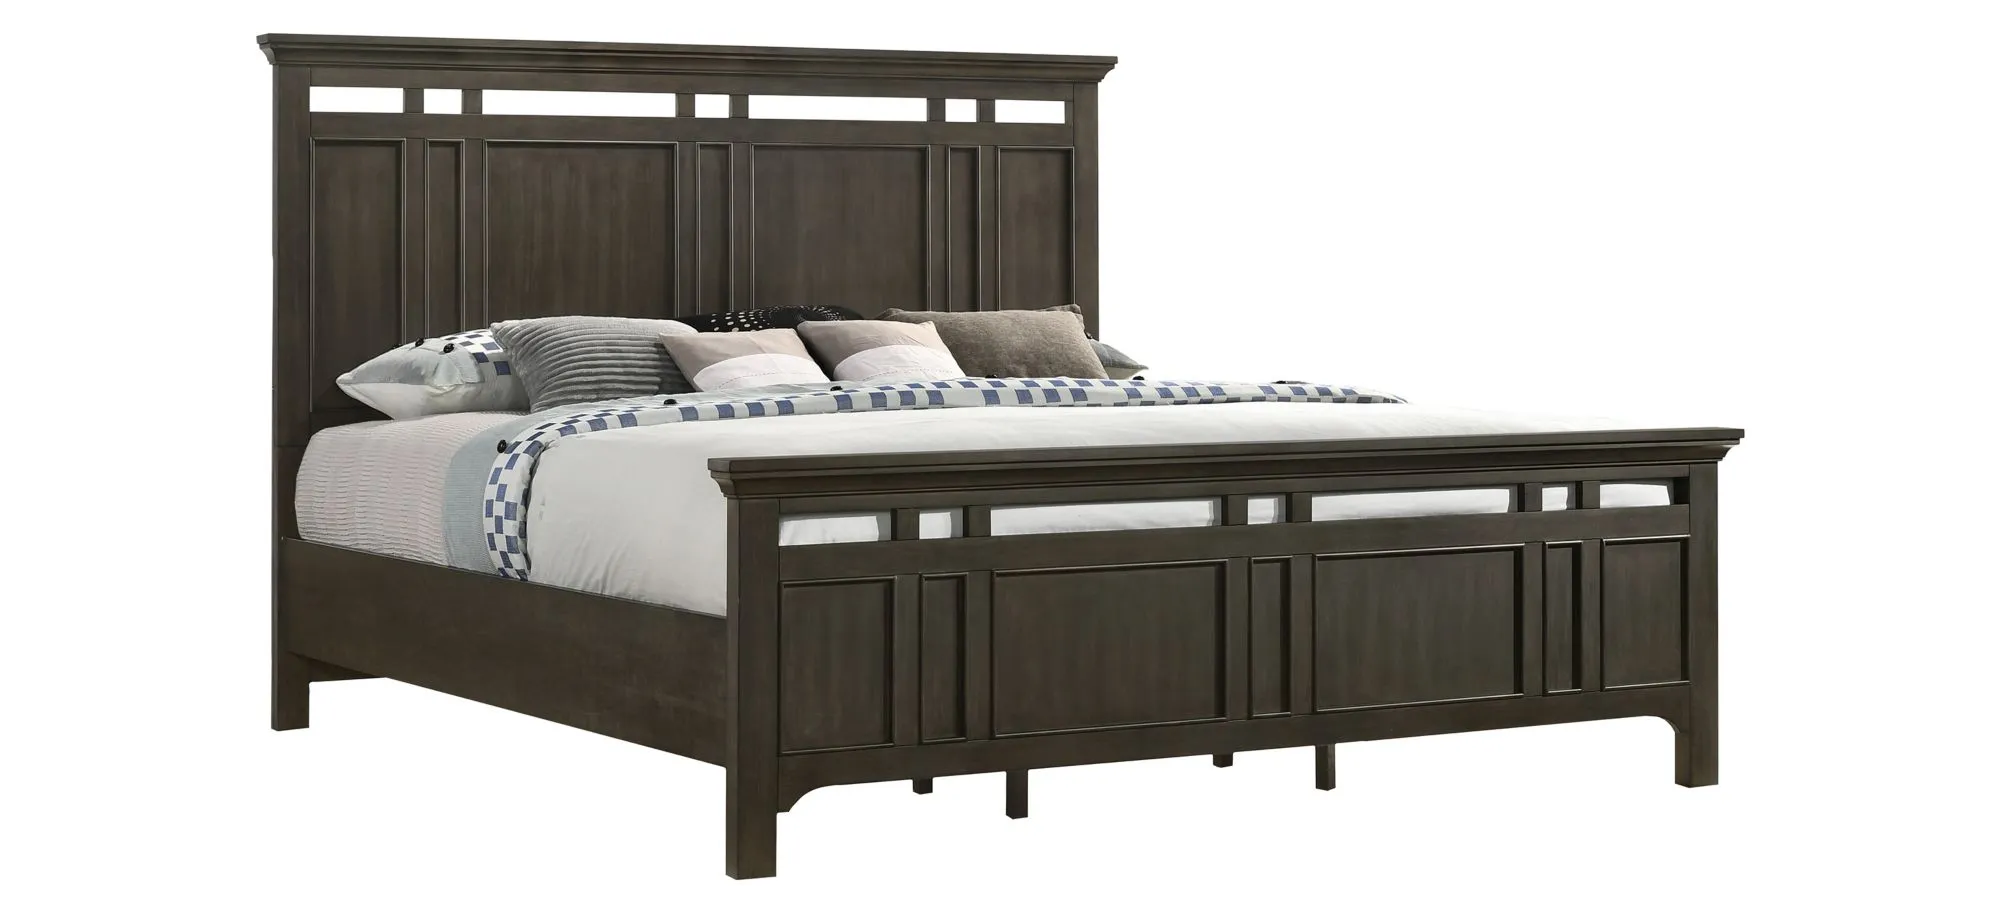 Hawthorne King Bed in Brushed Charcoal by Intercon